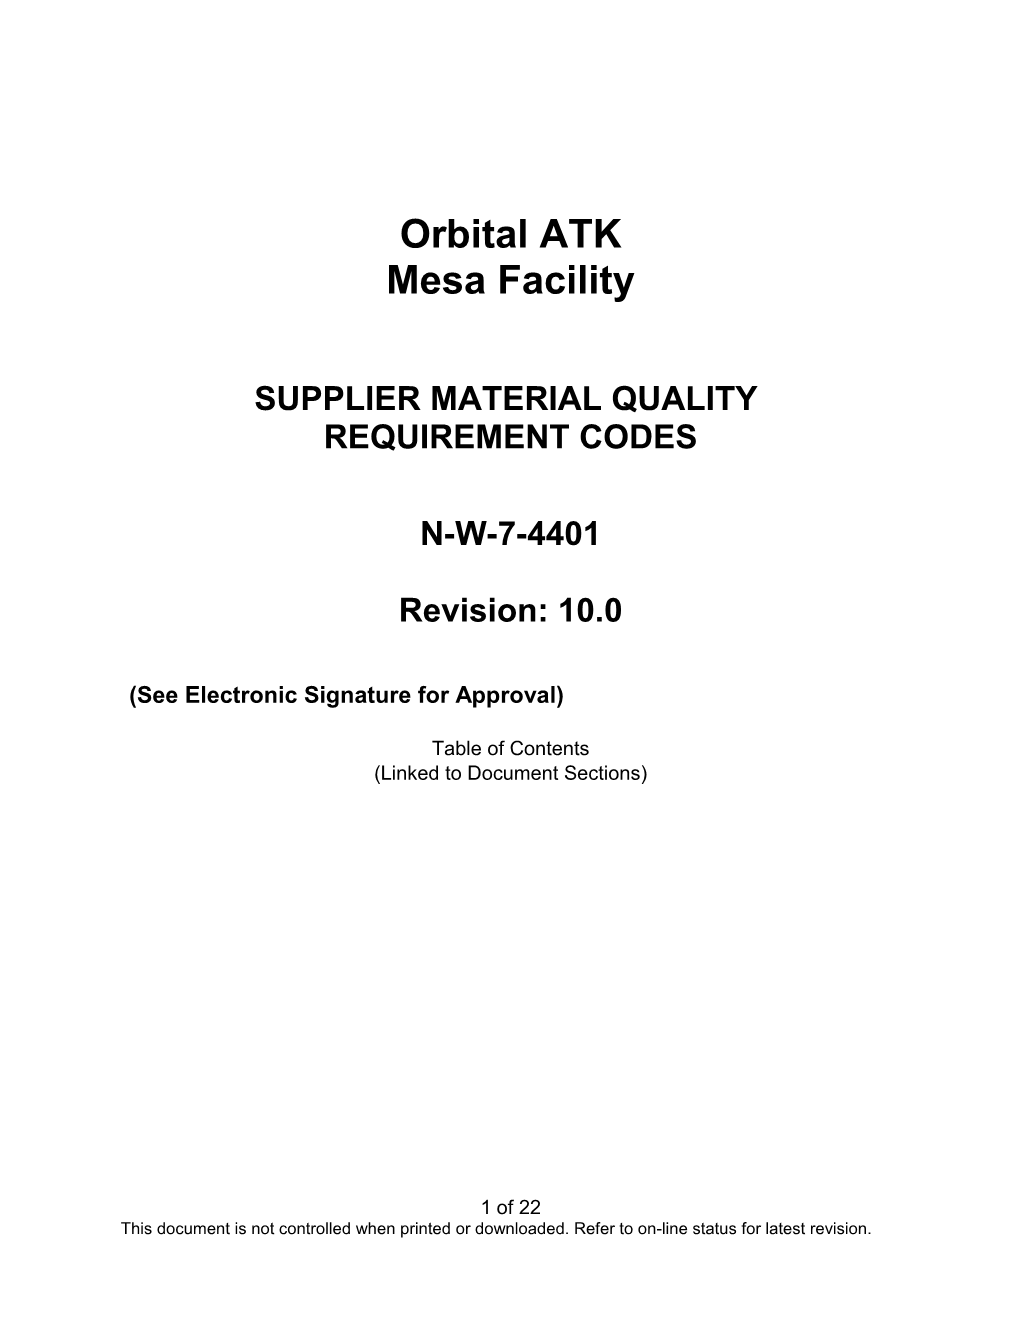 Supplier Material Quality Requirement Codes